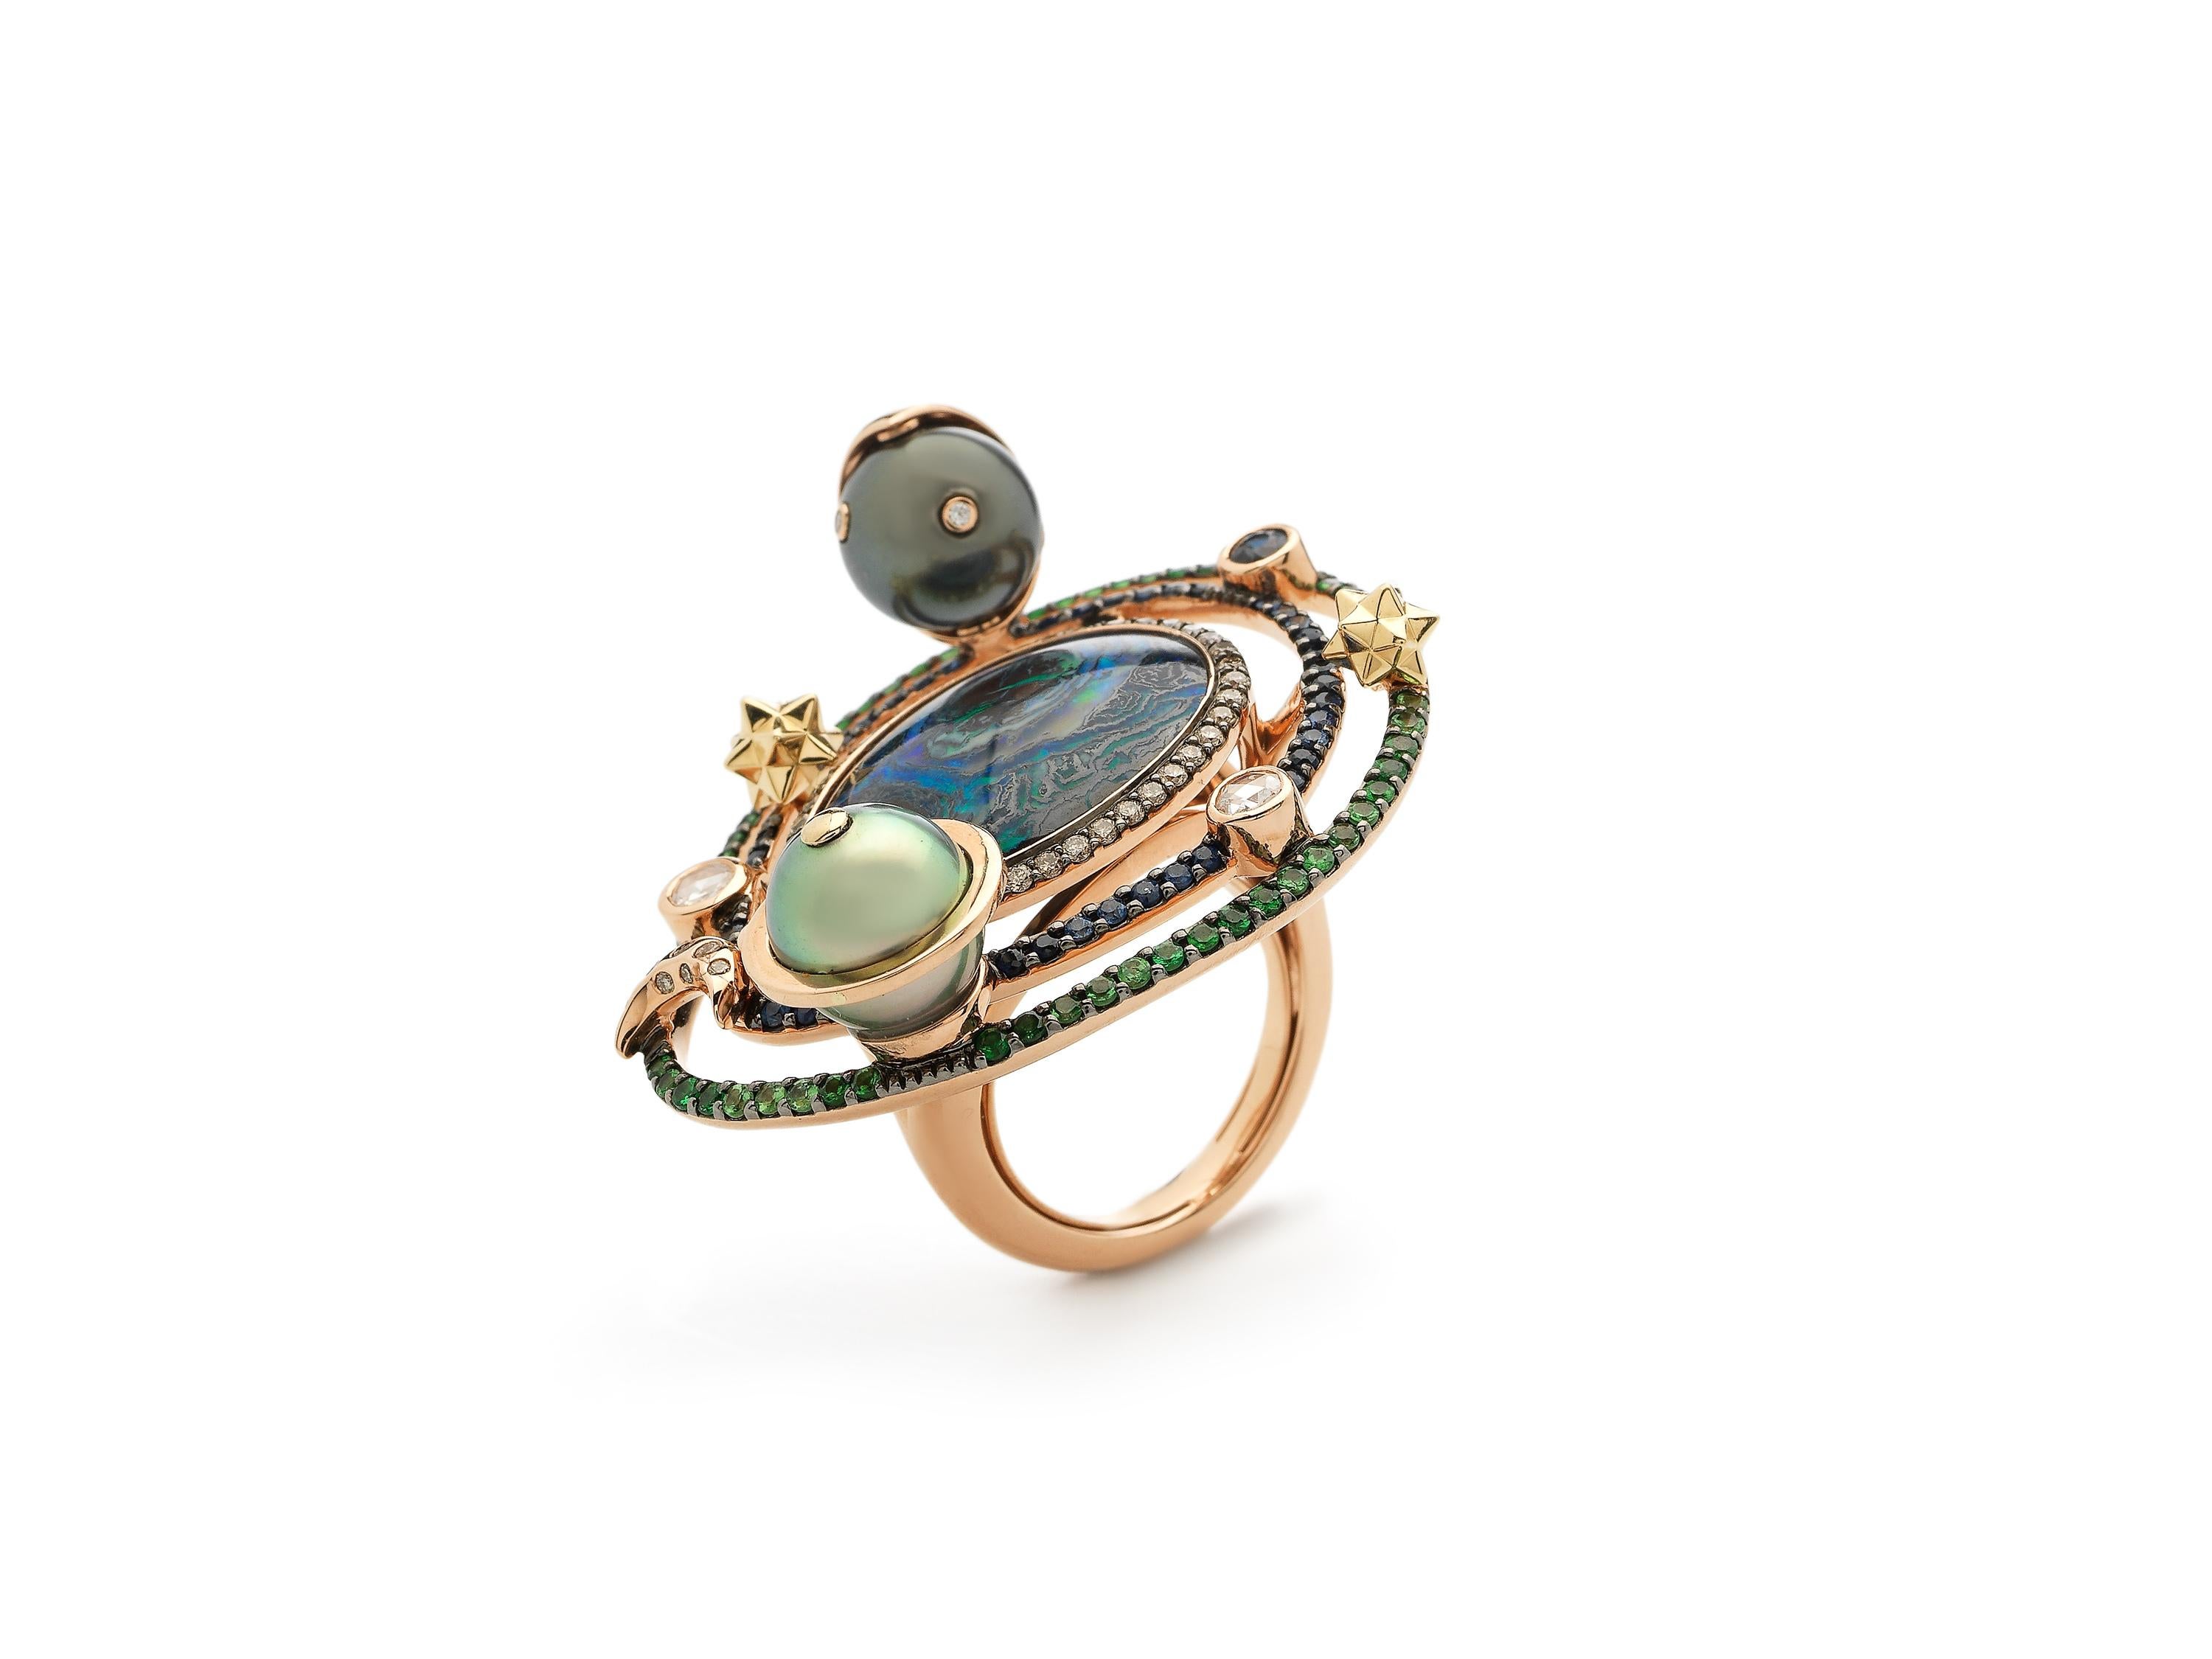 Bibi creates a miniature universe in this statement ring. At its center is a boulder opal that Bibi has chosen specifically for its unique colors and inclusions, that evokes the look of a swirling galaxy. Circling the opal are small planets,